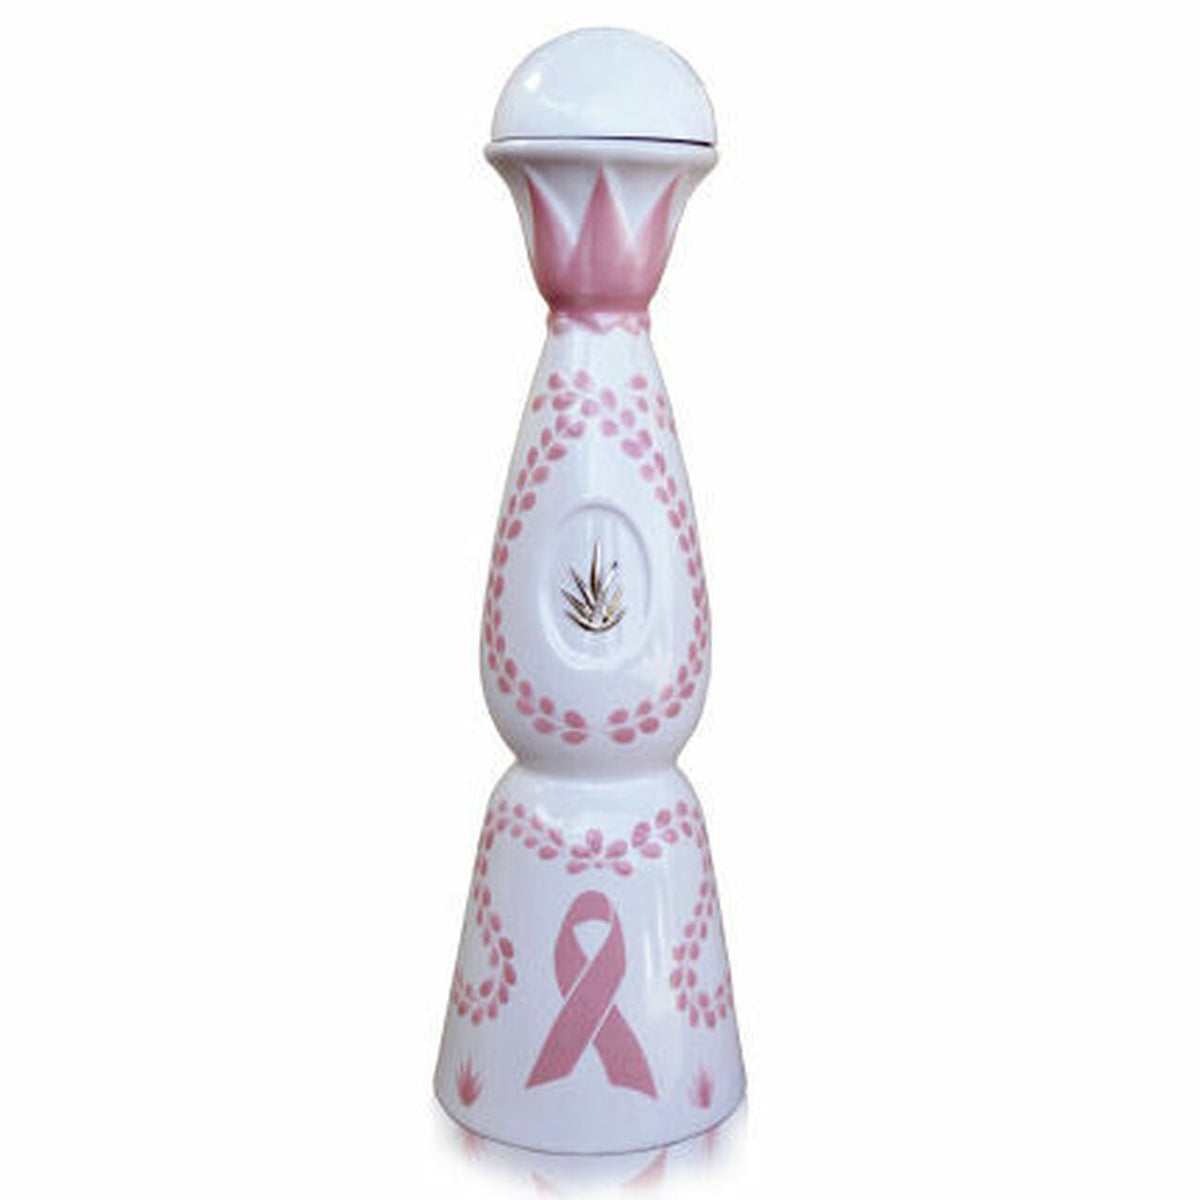 [BUY] Clase Azul Pink Joven Tequila Fast Delivery i Shop Liquor